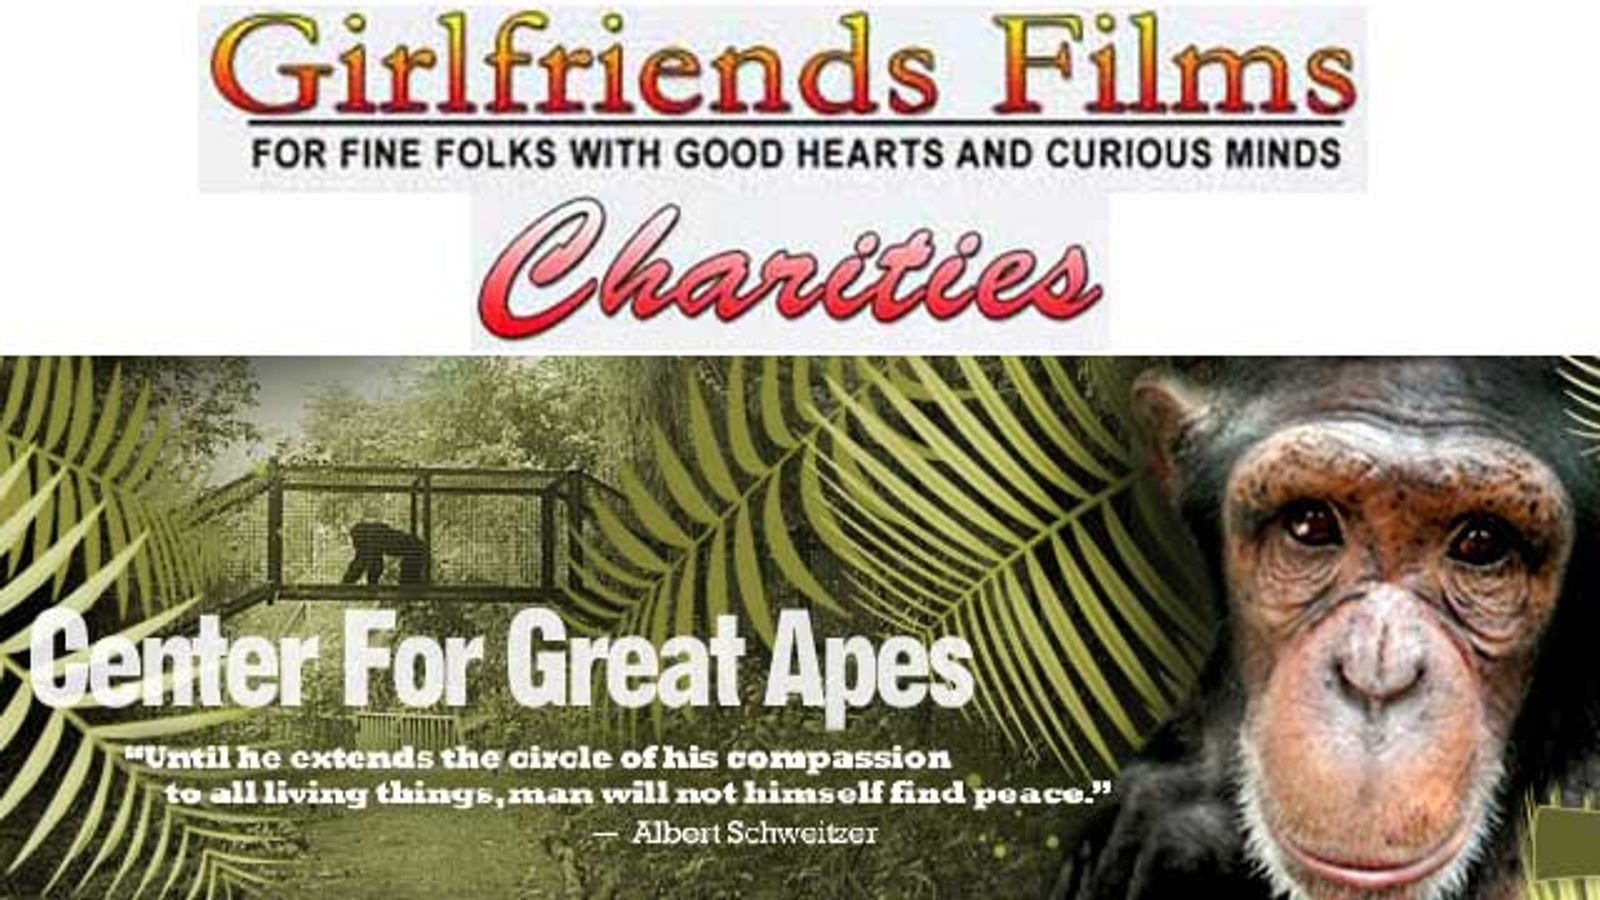 HotMovies.com Picks Center for Great Apes for Girlfriends' Donation